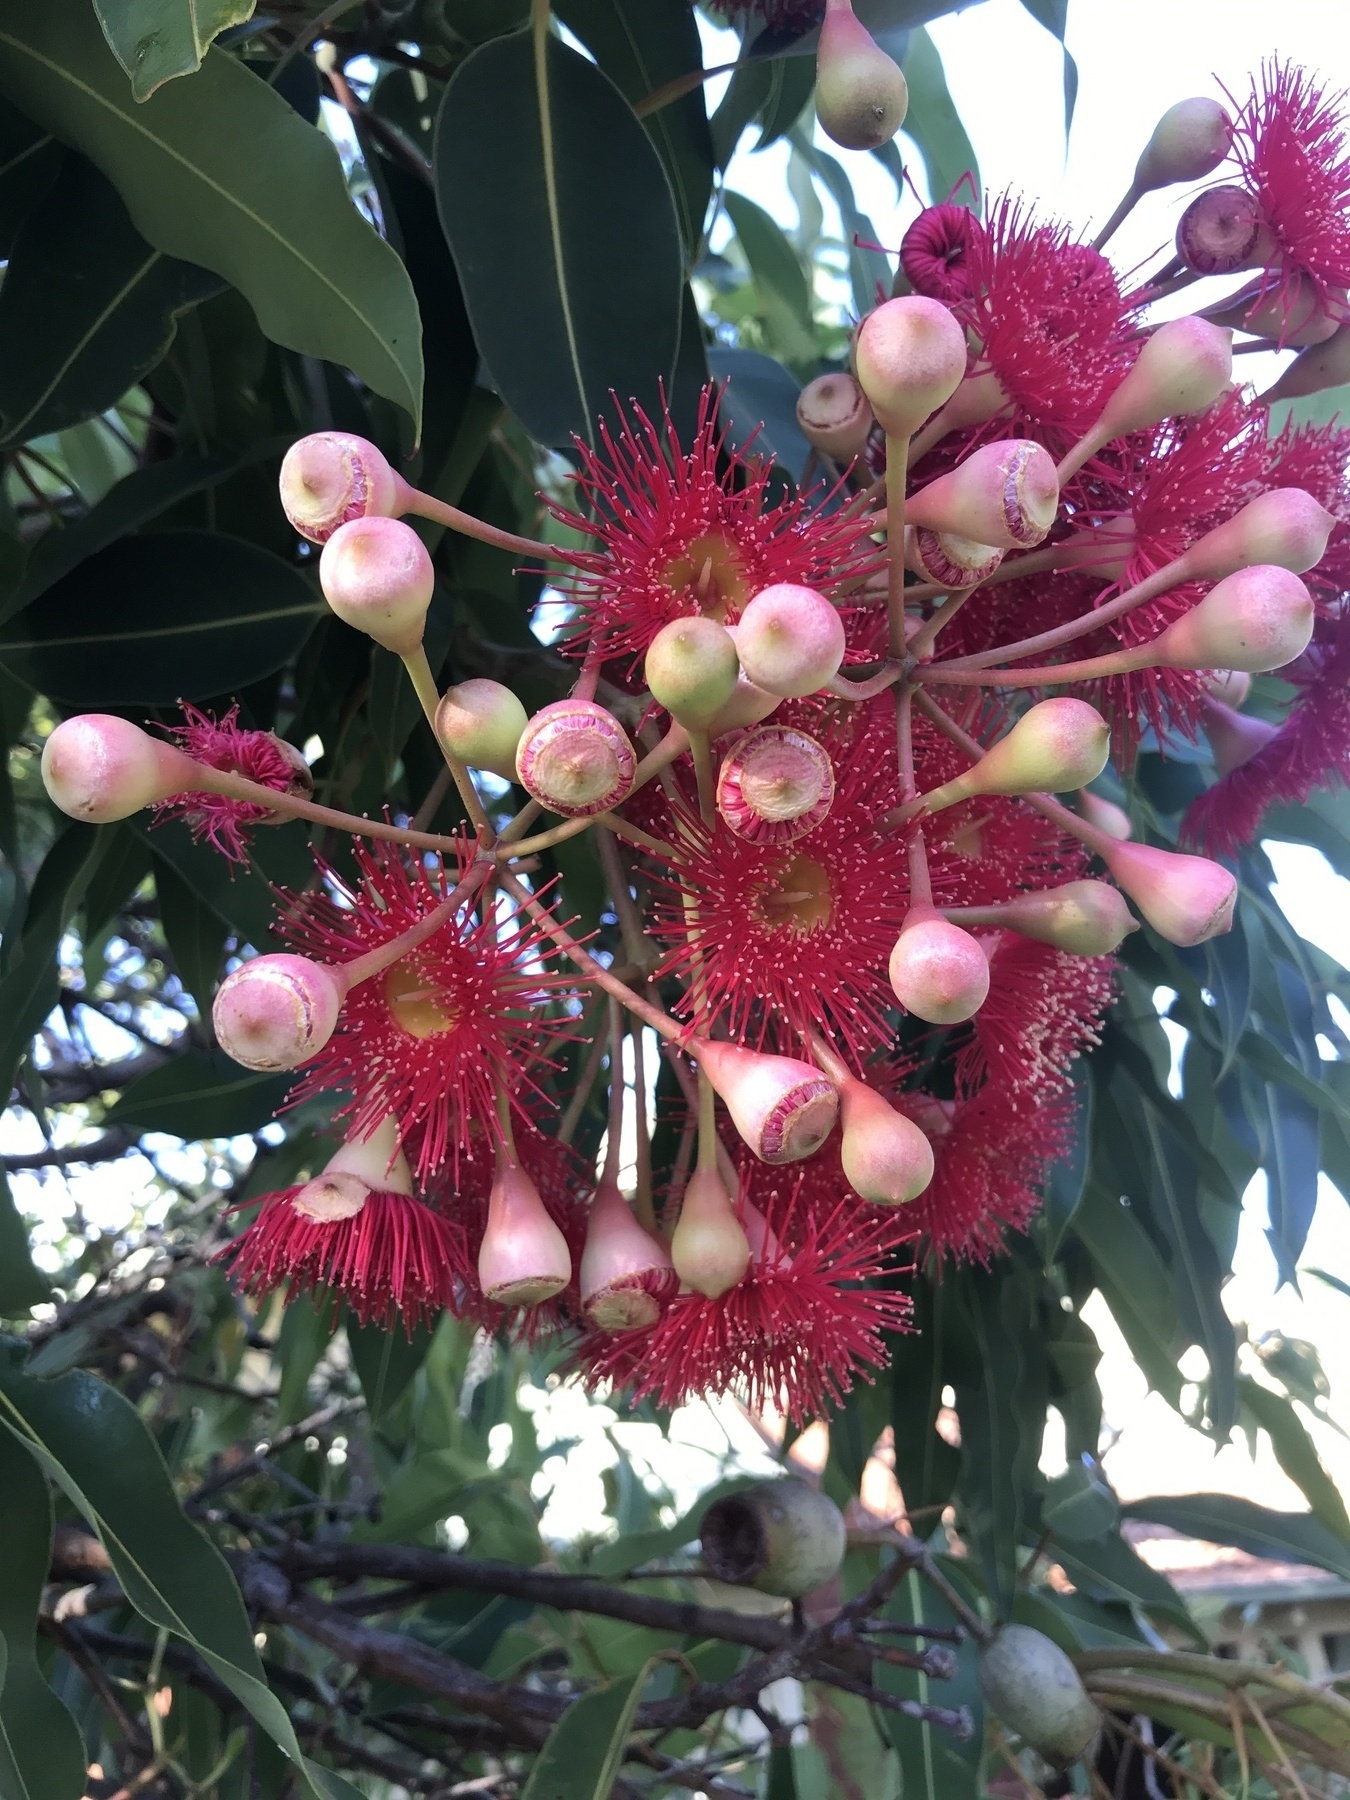 A cluster of gum tree flowers, as in Gum Blossoms 1, but here many more of them have been fertilised, and have shed their red frills and closed the lid over the cup shape of the gumnut. Now we can see that each gumnut has its own thick, succulent-looking stalk that flares out at the end, holding the gumnut in place. The nuts and their stems are all coloured with bands of greenish-cream and blushing pink or purple. Behind them are just as many flowers, if not more, that retain their frills of red, and below are two gumnuts that have hardened, opened and dropped their seeds.